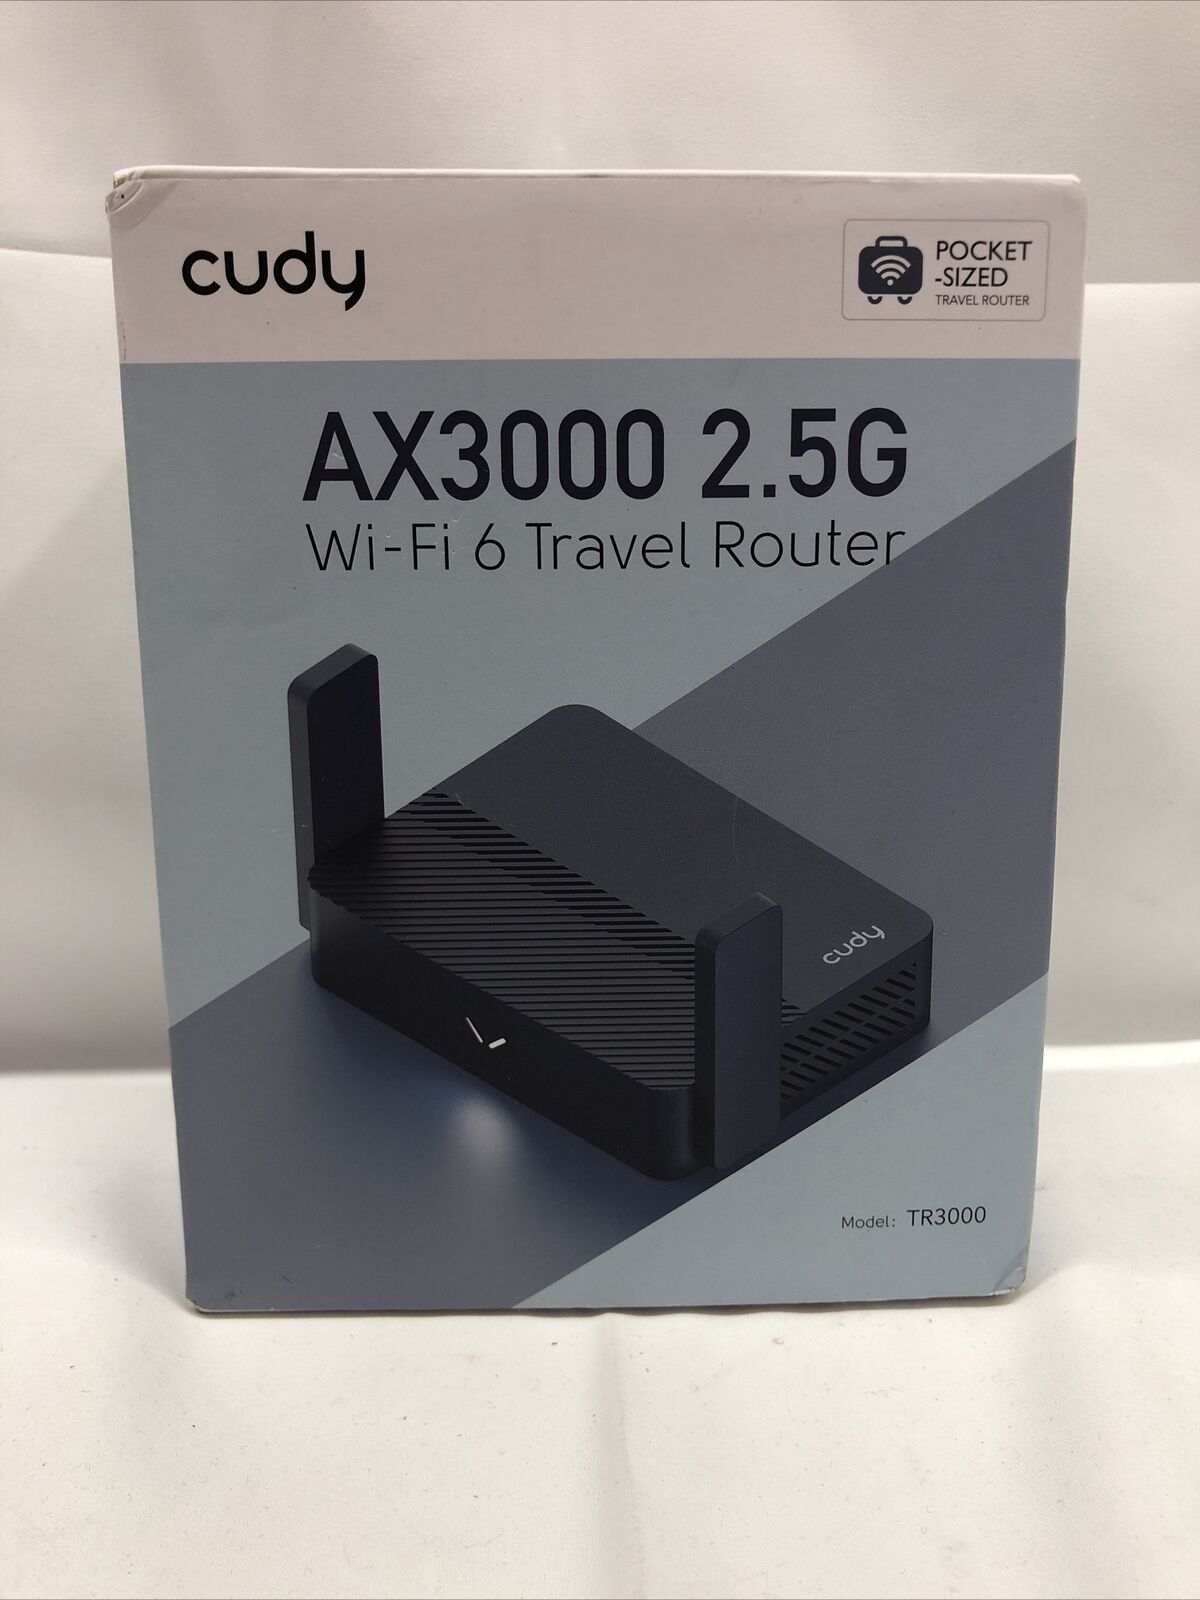 Cudy AX3000 2.5G Pocket-Sized Wi-Fi Travel Router / Extender / Repeater | TR3000